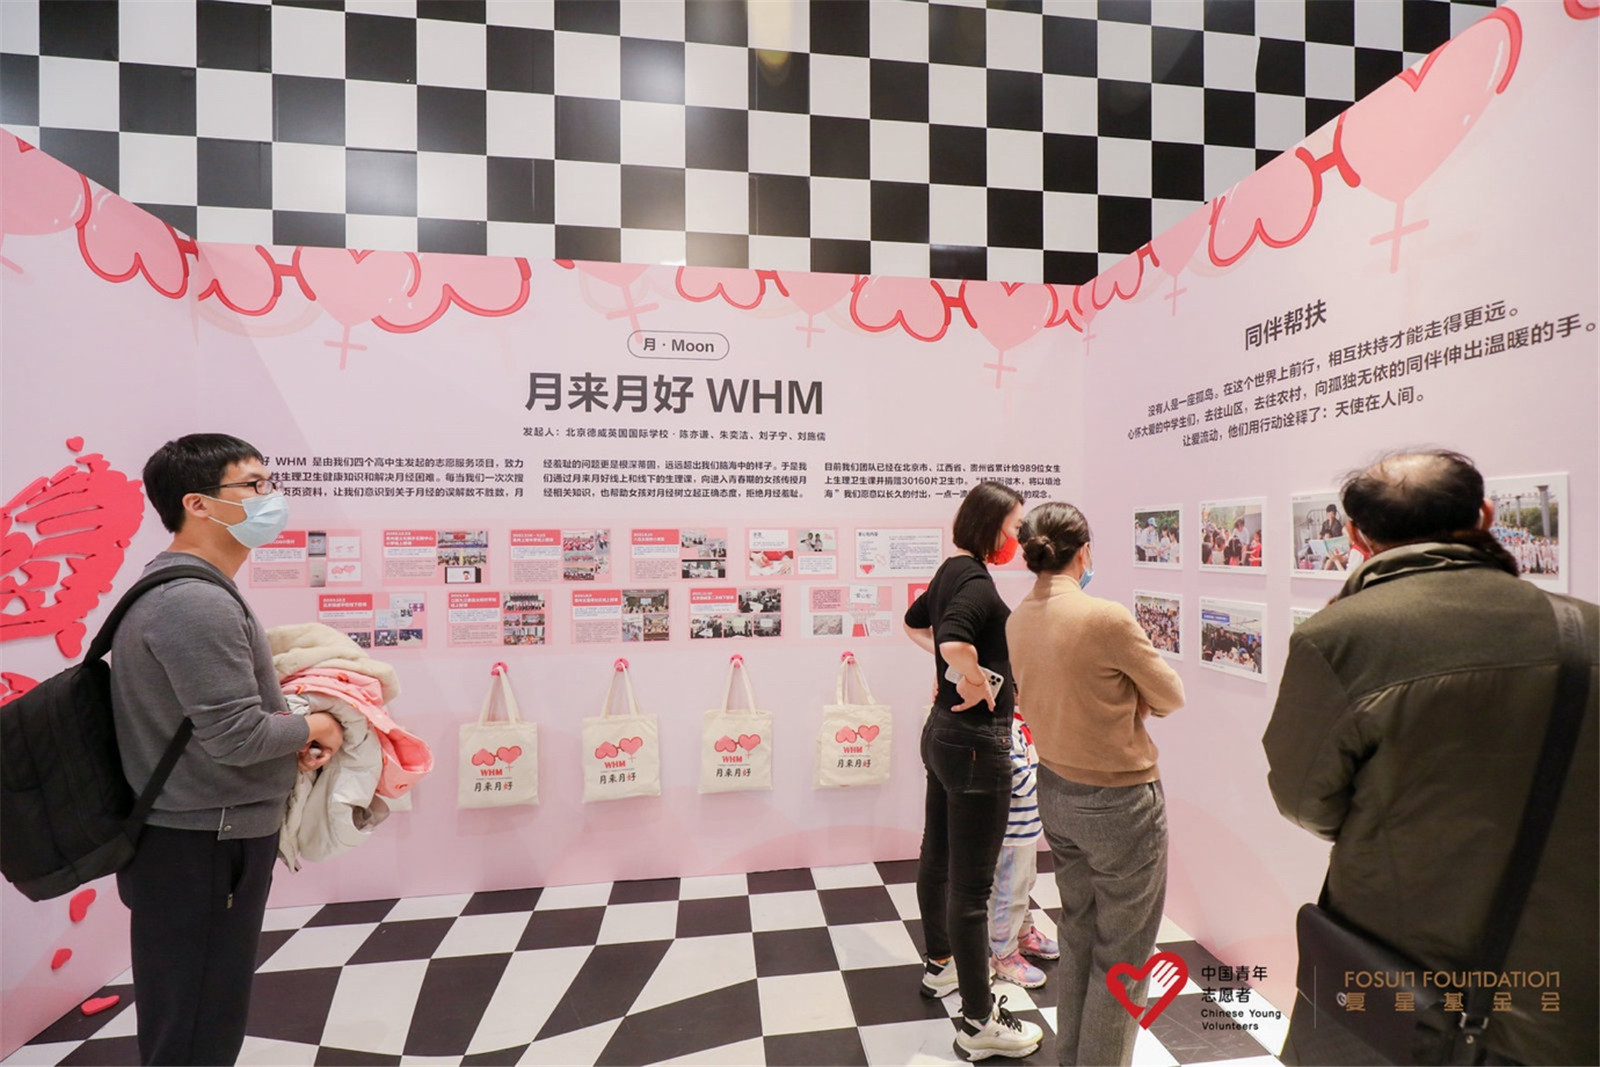 Exhibition in Shanghai to raise awareness for WHM